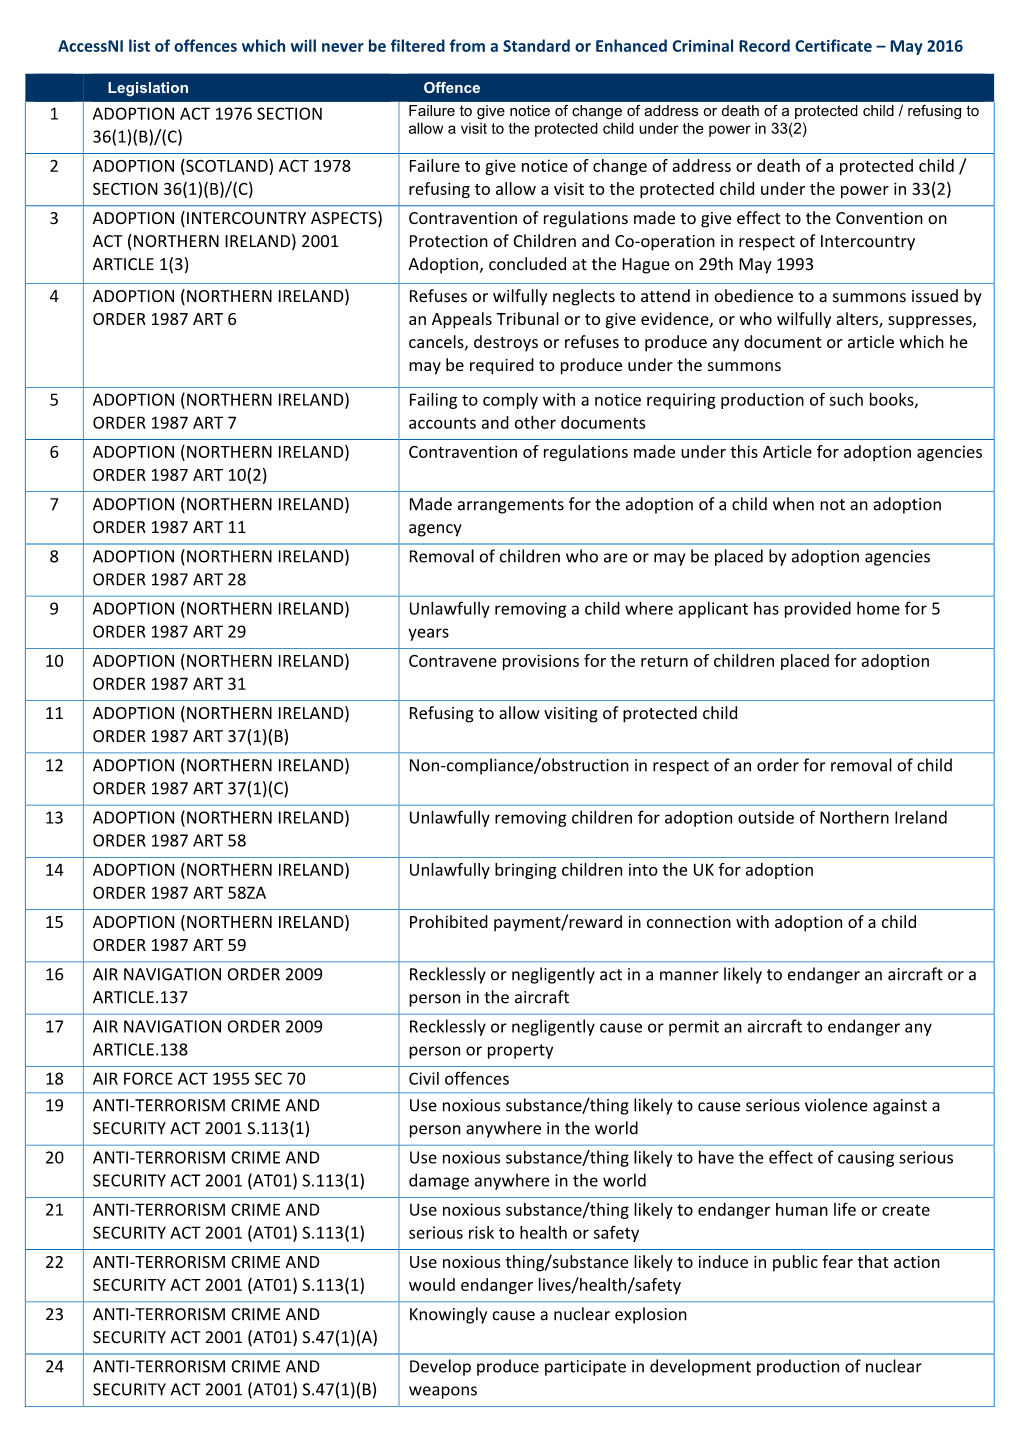 List of Specified Offences 2016